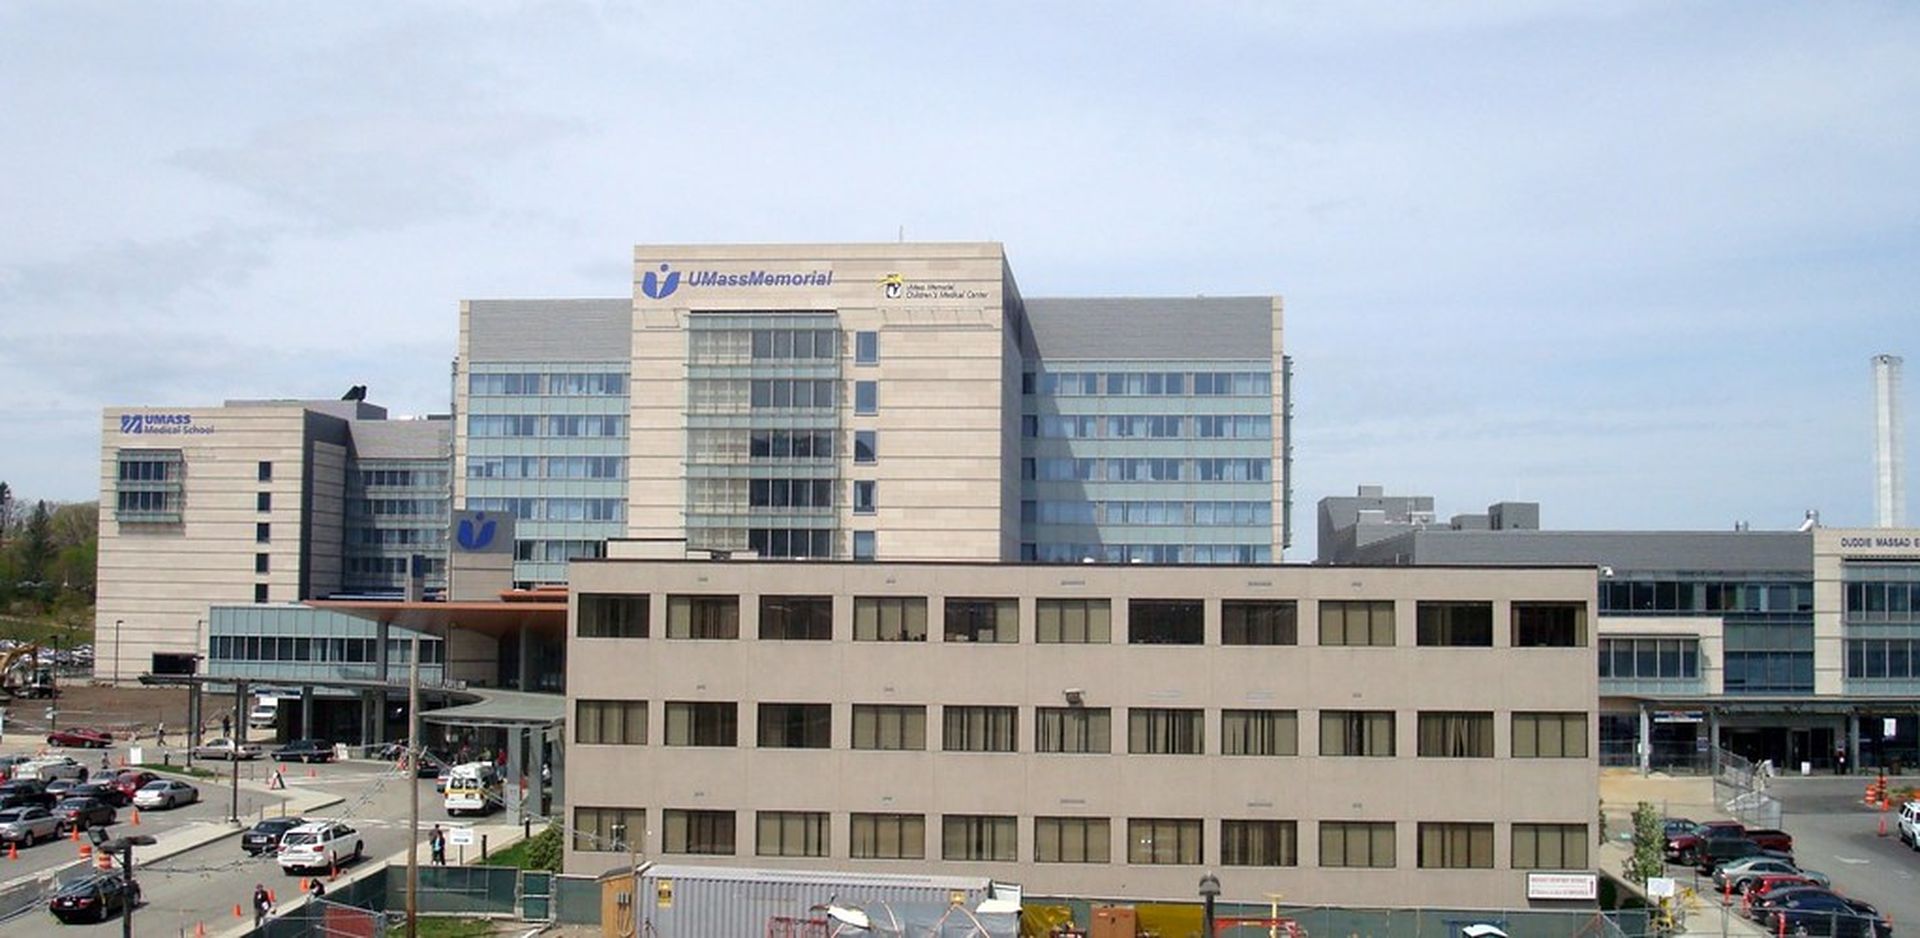 The hack of multiple employee email accounts at UMass Memorial Health led to the potential compromise of data tied to about 209,000 patients (Photo credit: &#8220;UMass Memorial Medical Center&#8221; by Svadilfari is licensed under CC BY-ND 2.0)